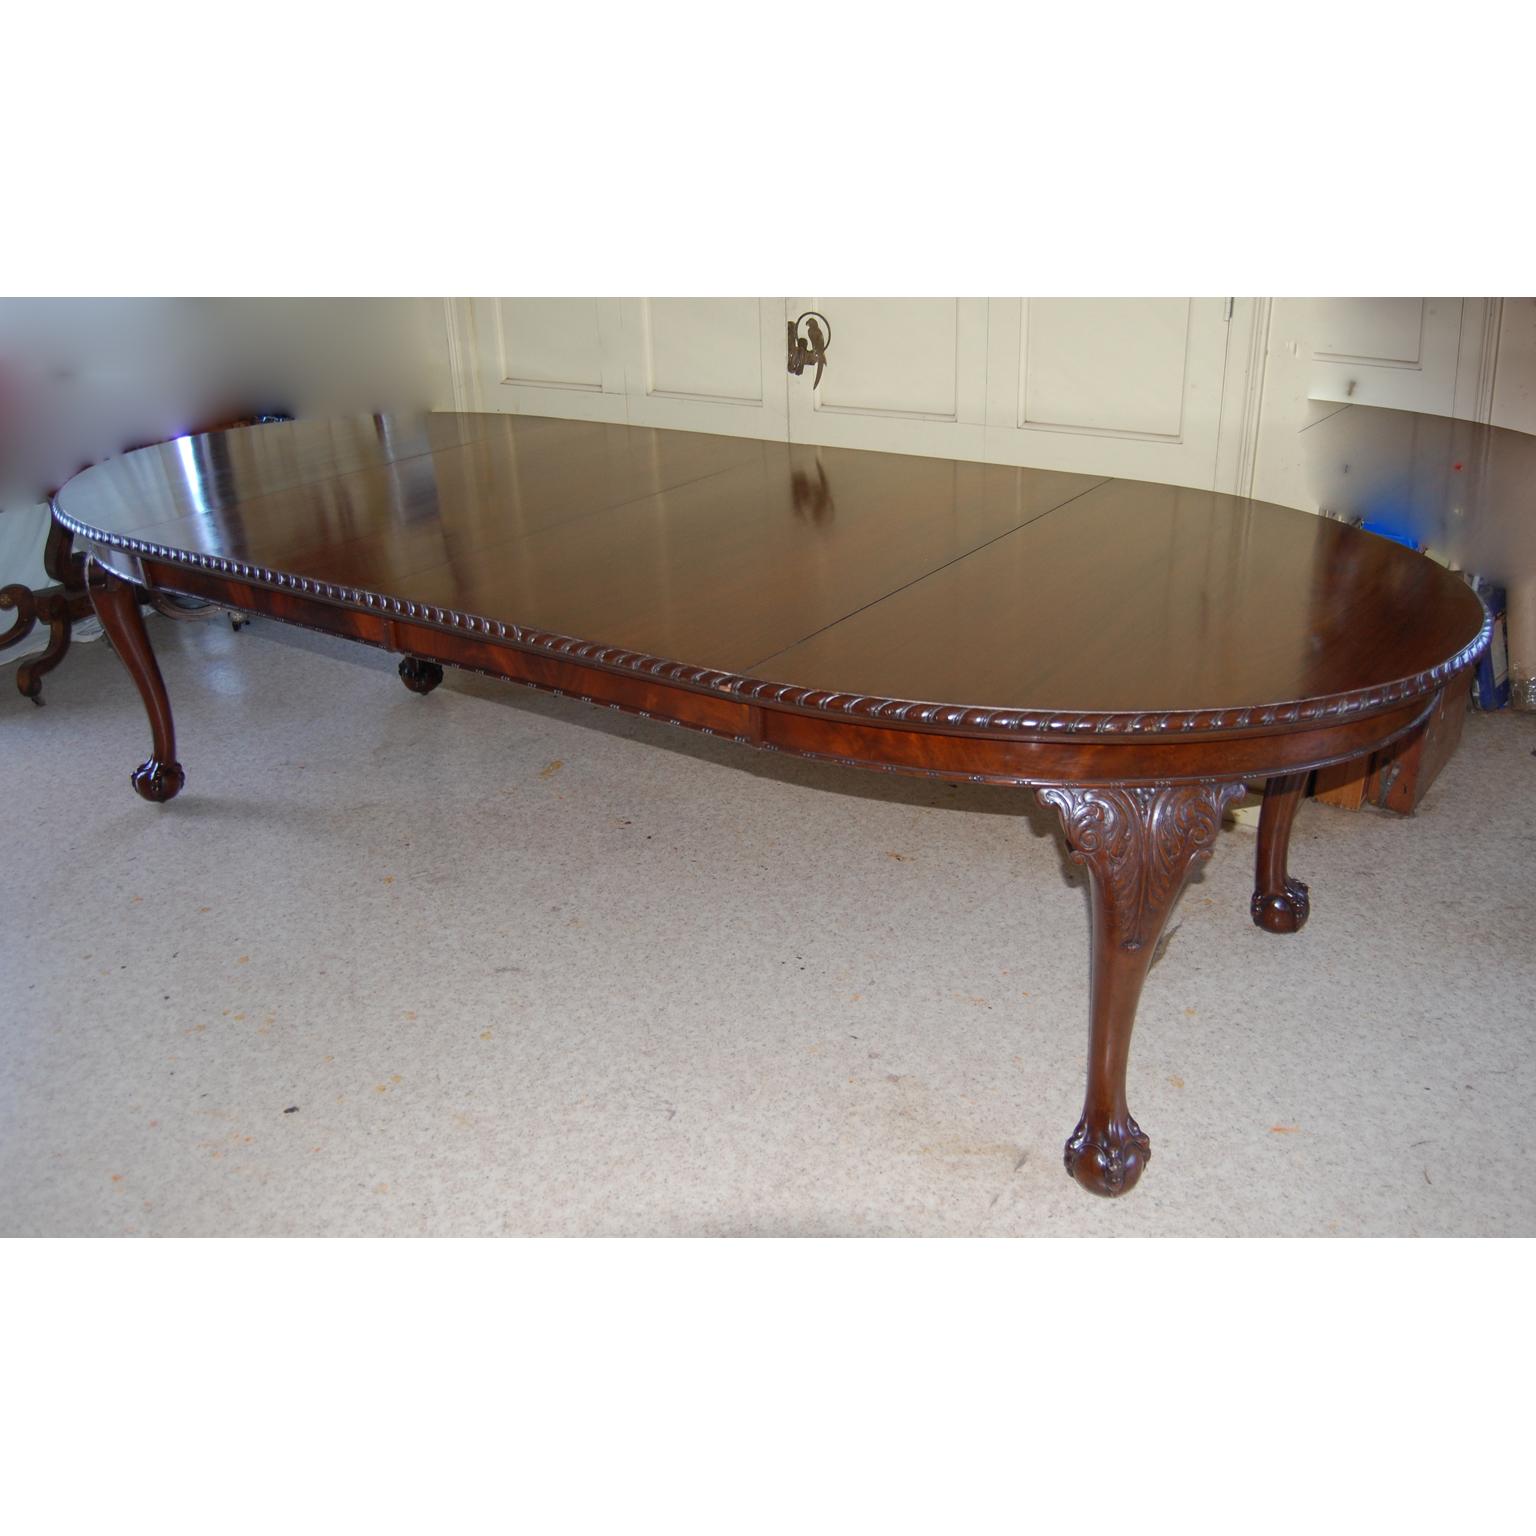 English Chippendale style mahogany banquet table with two leaves, acanthus leaf carved cabriole legs, ball and claw feet, the top with gadrooned carved edge. This versatile table easily cranks out and in to accommodate none, one or two leaves. The